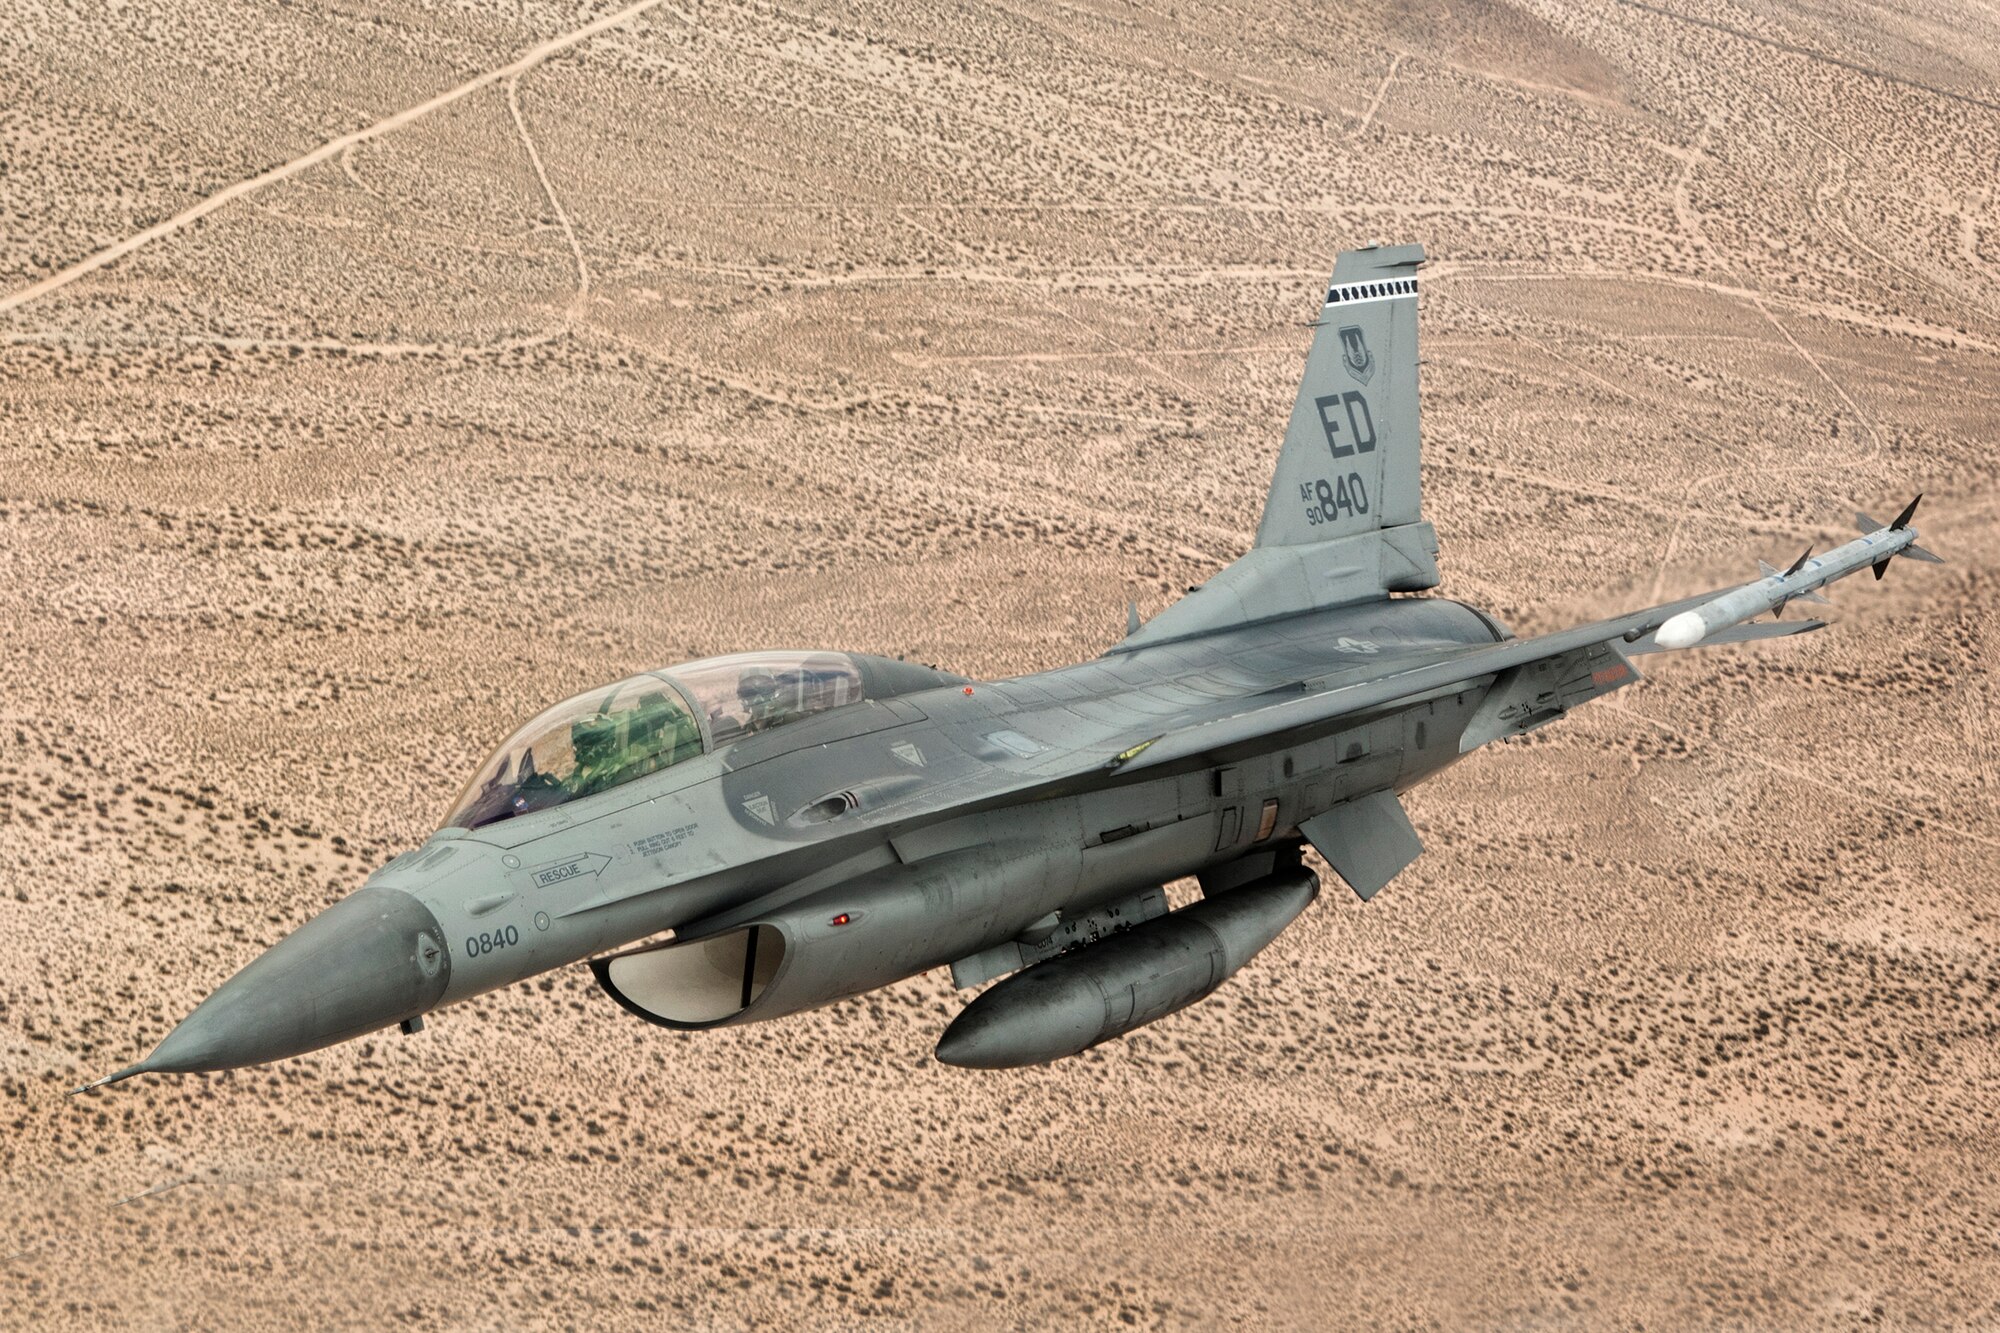 The U.S. Air Force's F-16D, tail # 840, is currently assigned and tested at the 416th Flight Test Squadron and was initally used as the Automatic Collision Avoidance Technology, or ACAT, aircraft in the ACAT Fighter Risk Reduction Project. This project was created to develop collision avoidance technologies for fighter/attack aircraft that would reduce the risk of ground and mid-air collisions. (Photo by Chad Bellay/Lockheed Martin)